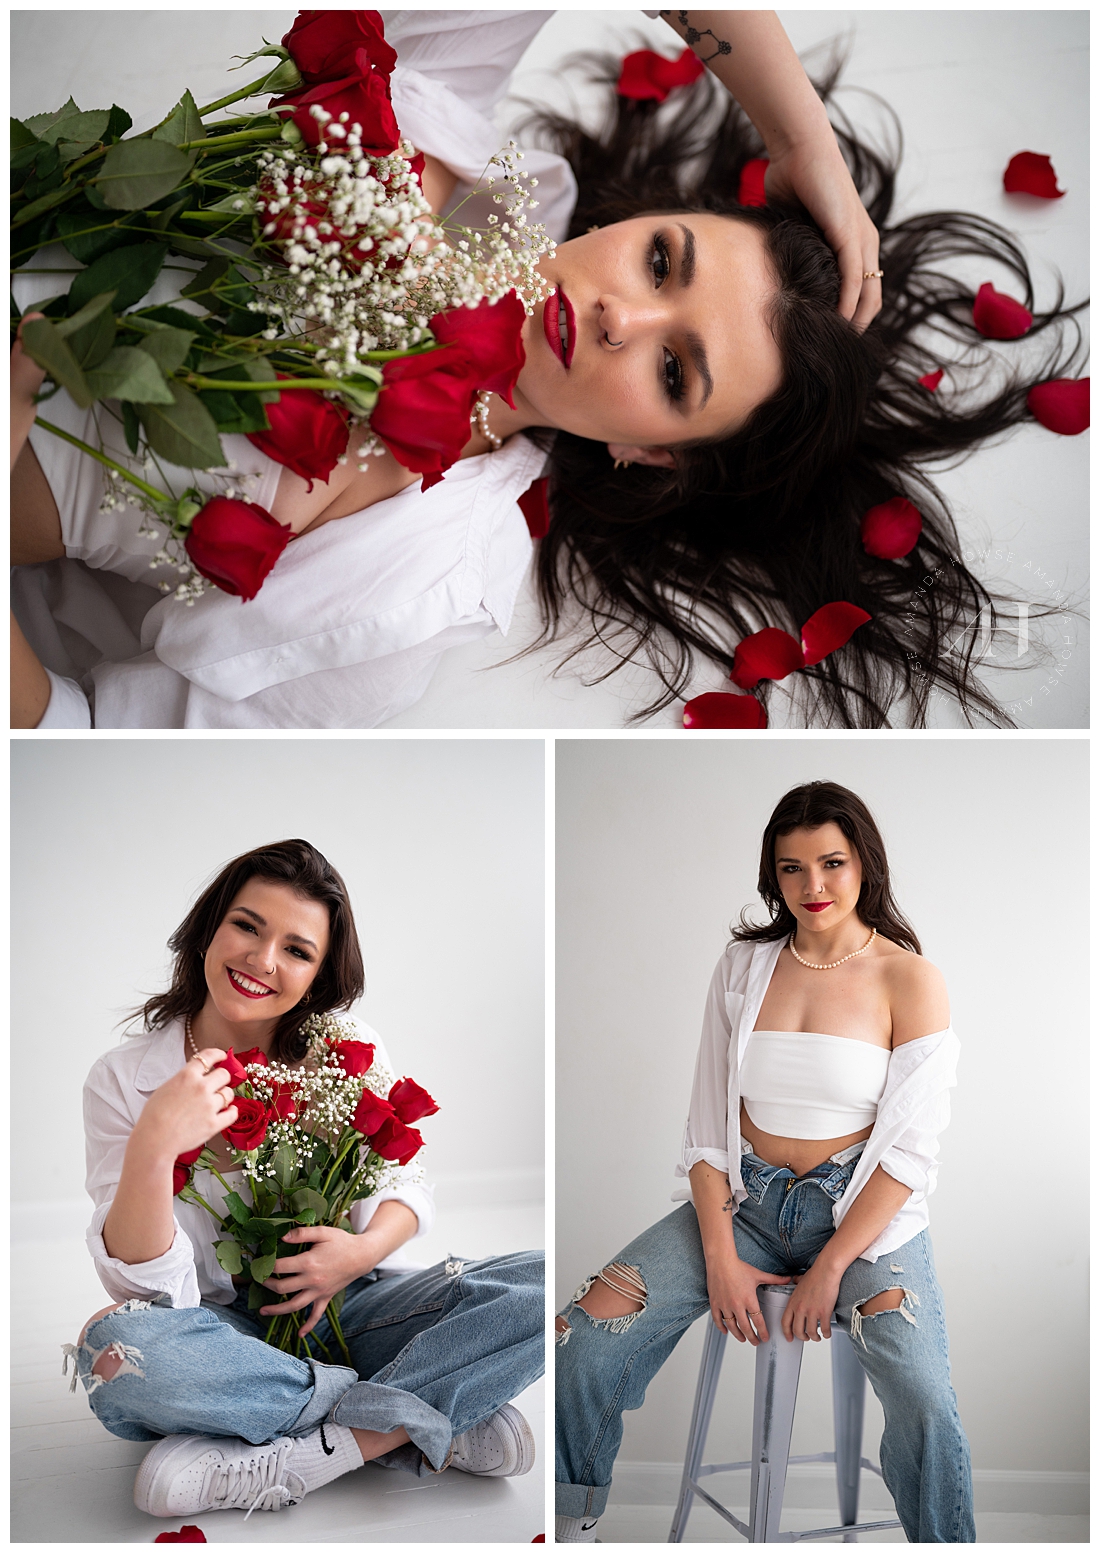 #Flowerwear Portraits in Downtown Tacoma Studio | Amanda Howse Photography